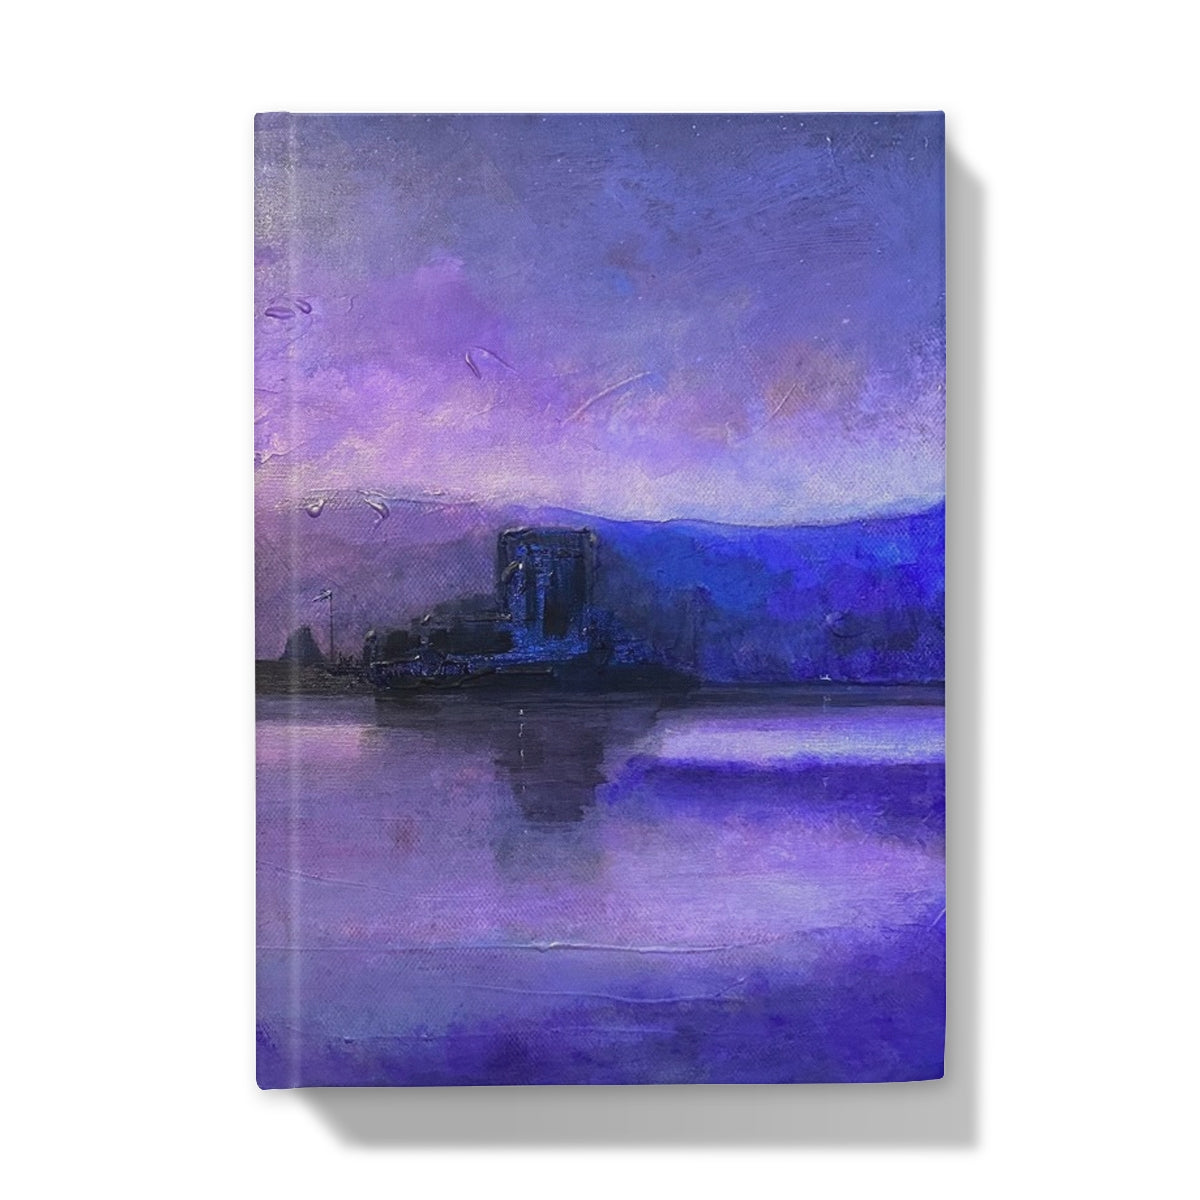 Eilean Donan Castle Moonset Art Gifts Hardback Journal-Journals & Notebooks-Historic & Iconic Scotland Art Gallery-A5-Plain-Paintings, Prints, Homeware, Art Gifts From Scotland By Scottish Artist Kevin Hunter